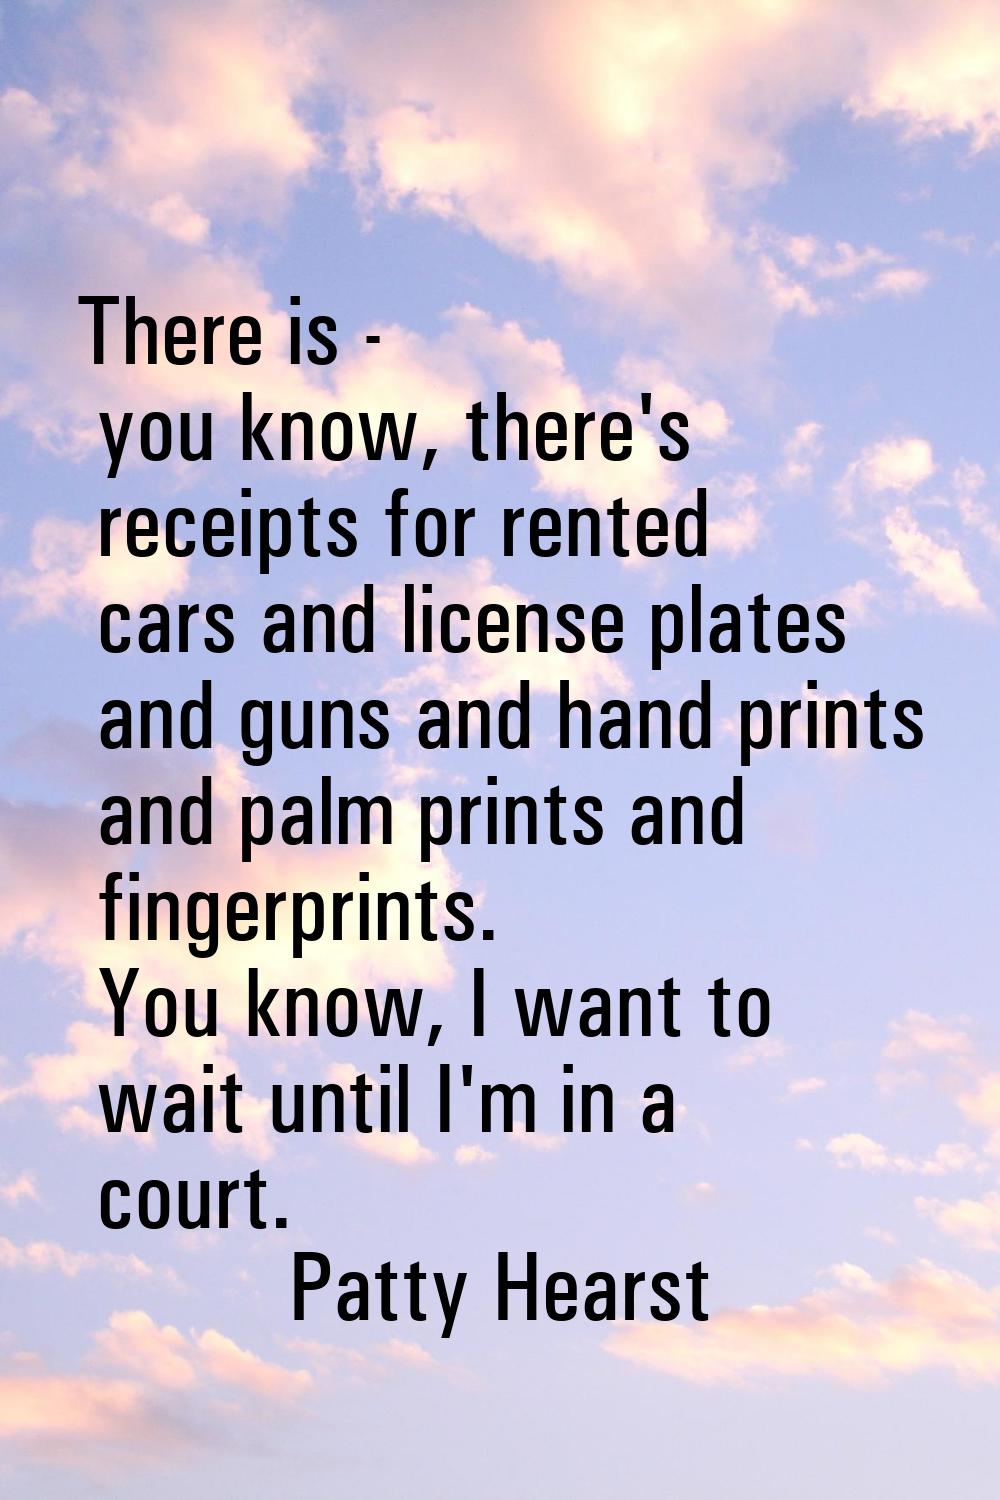 There is - you know, there's receipts for rented cars and license plates and guns and hand prints a